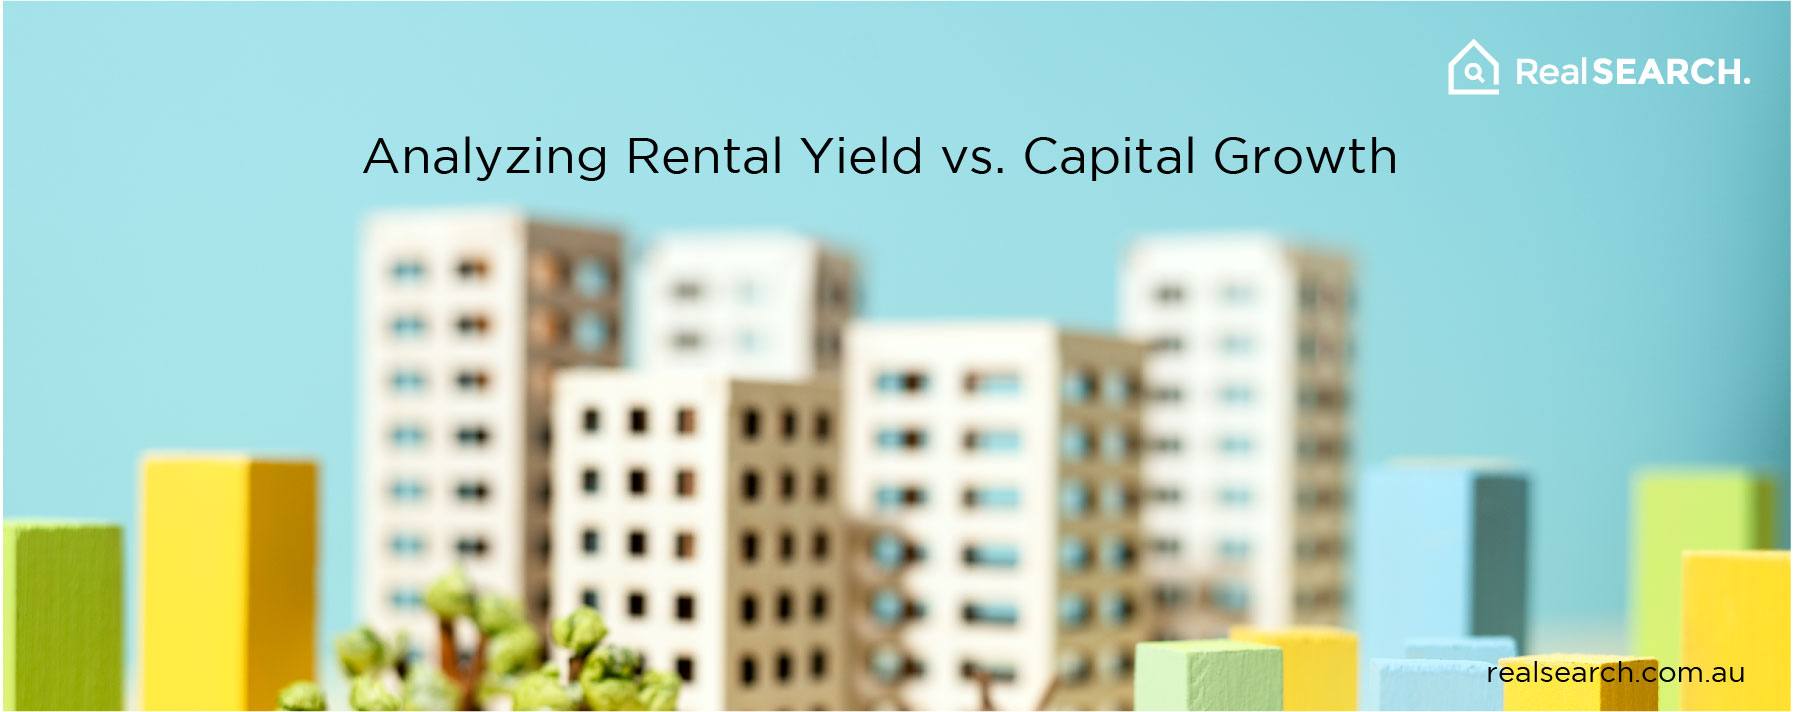 Investor's Guide: Analyzing Rental Yield vs. Capital Growth in Australian Real Estate